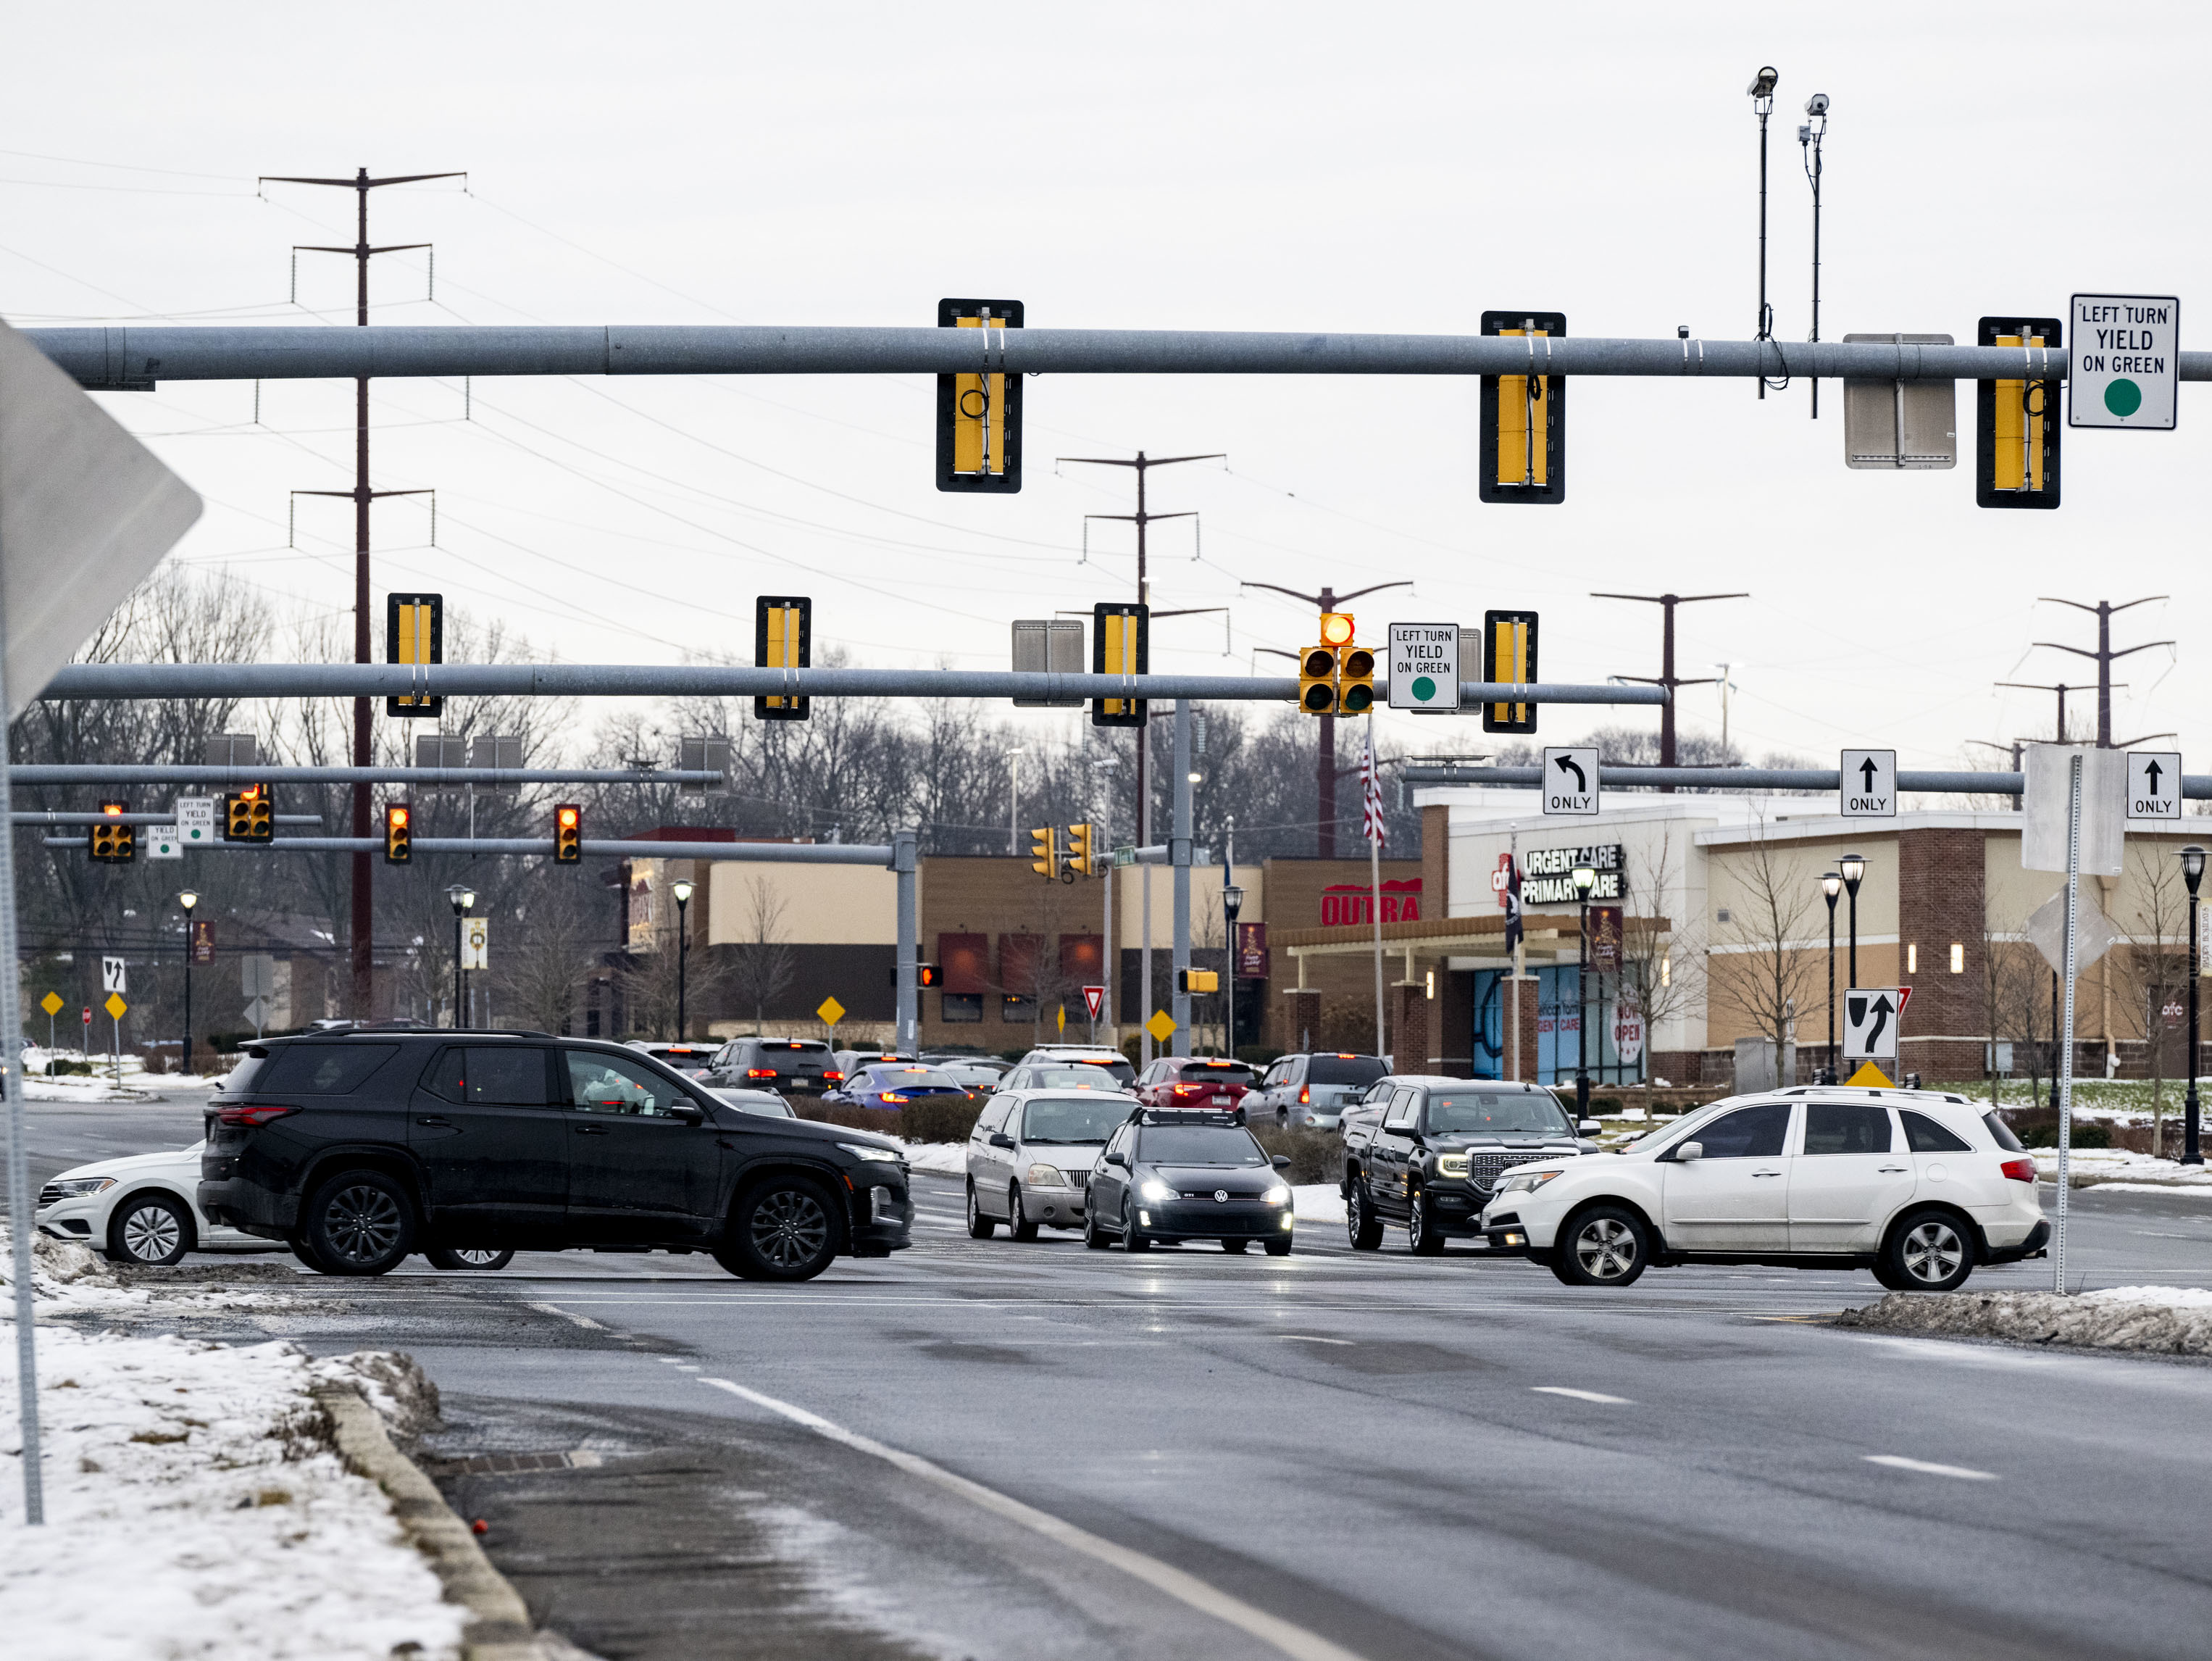 a bridge for route 222 over krocks road? idea pitched to protect pedestrians at busy hamilton crossings intersection